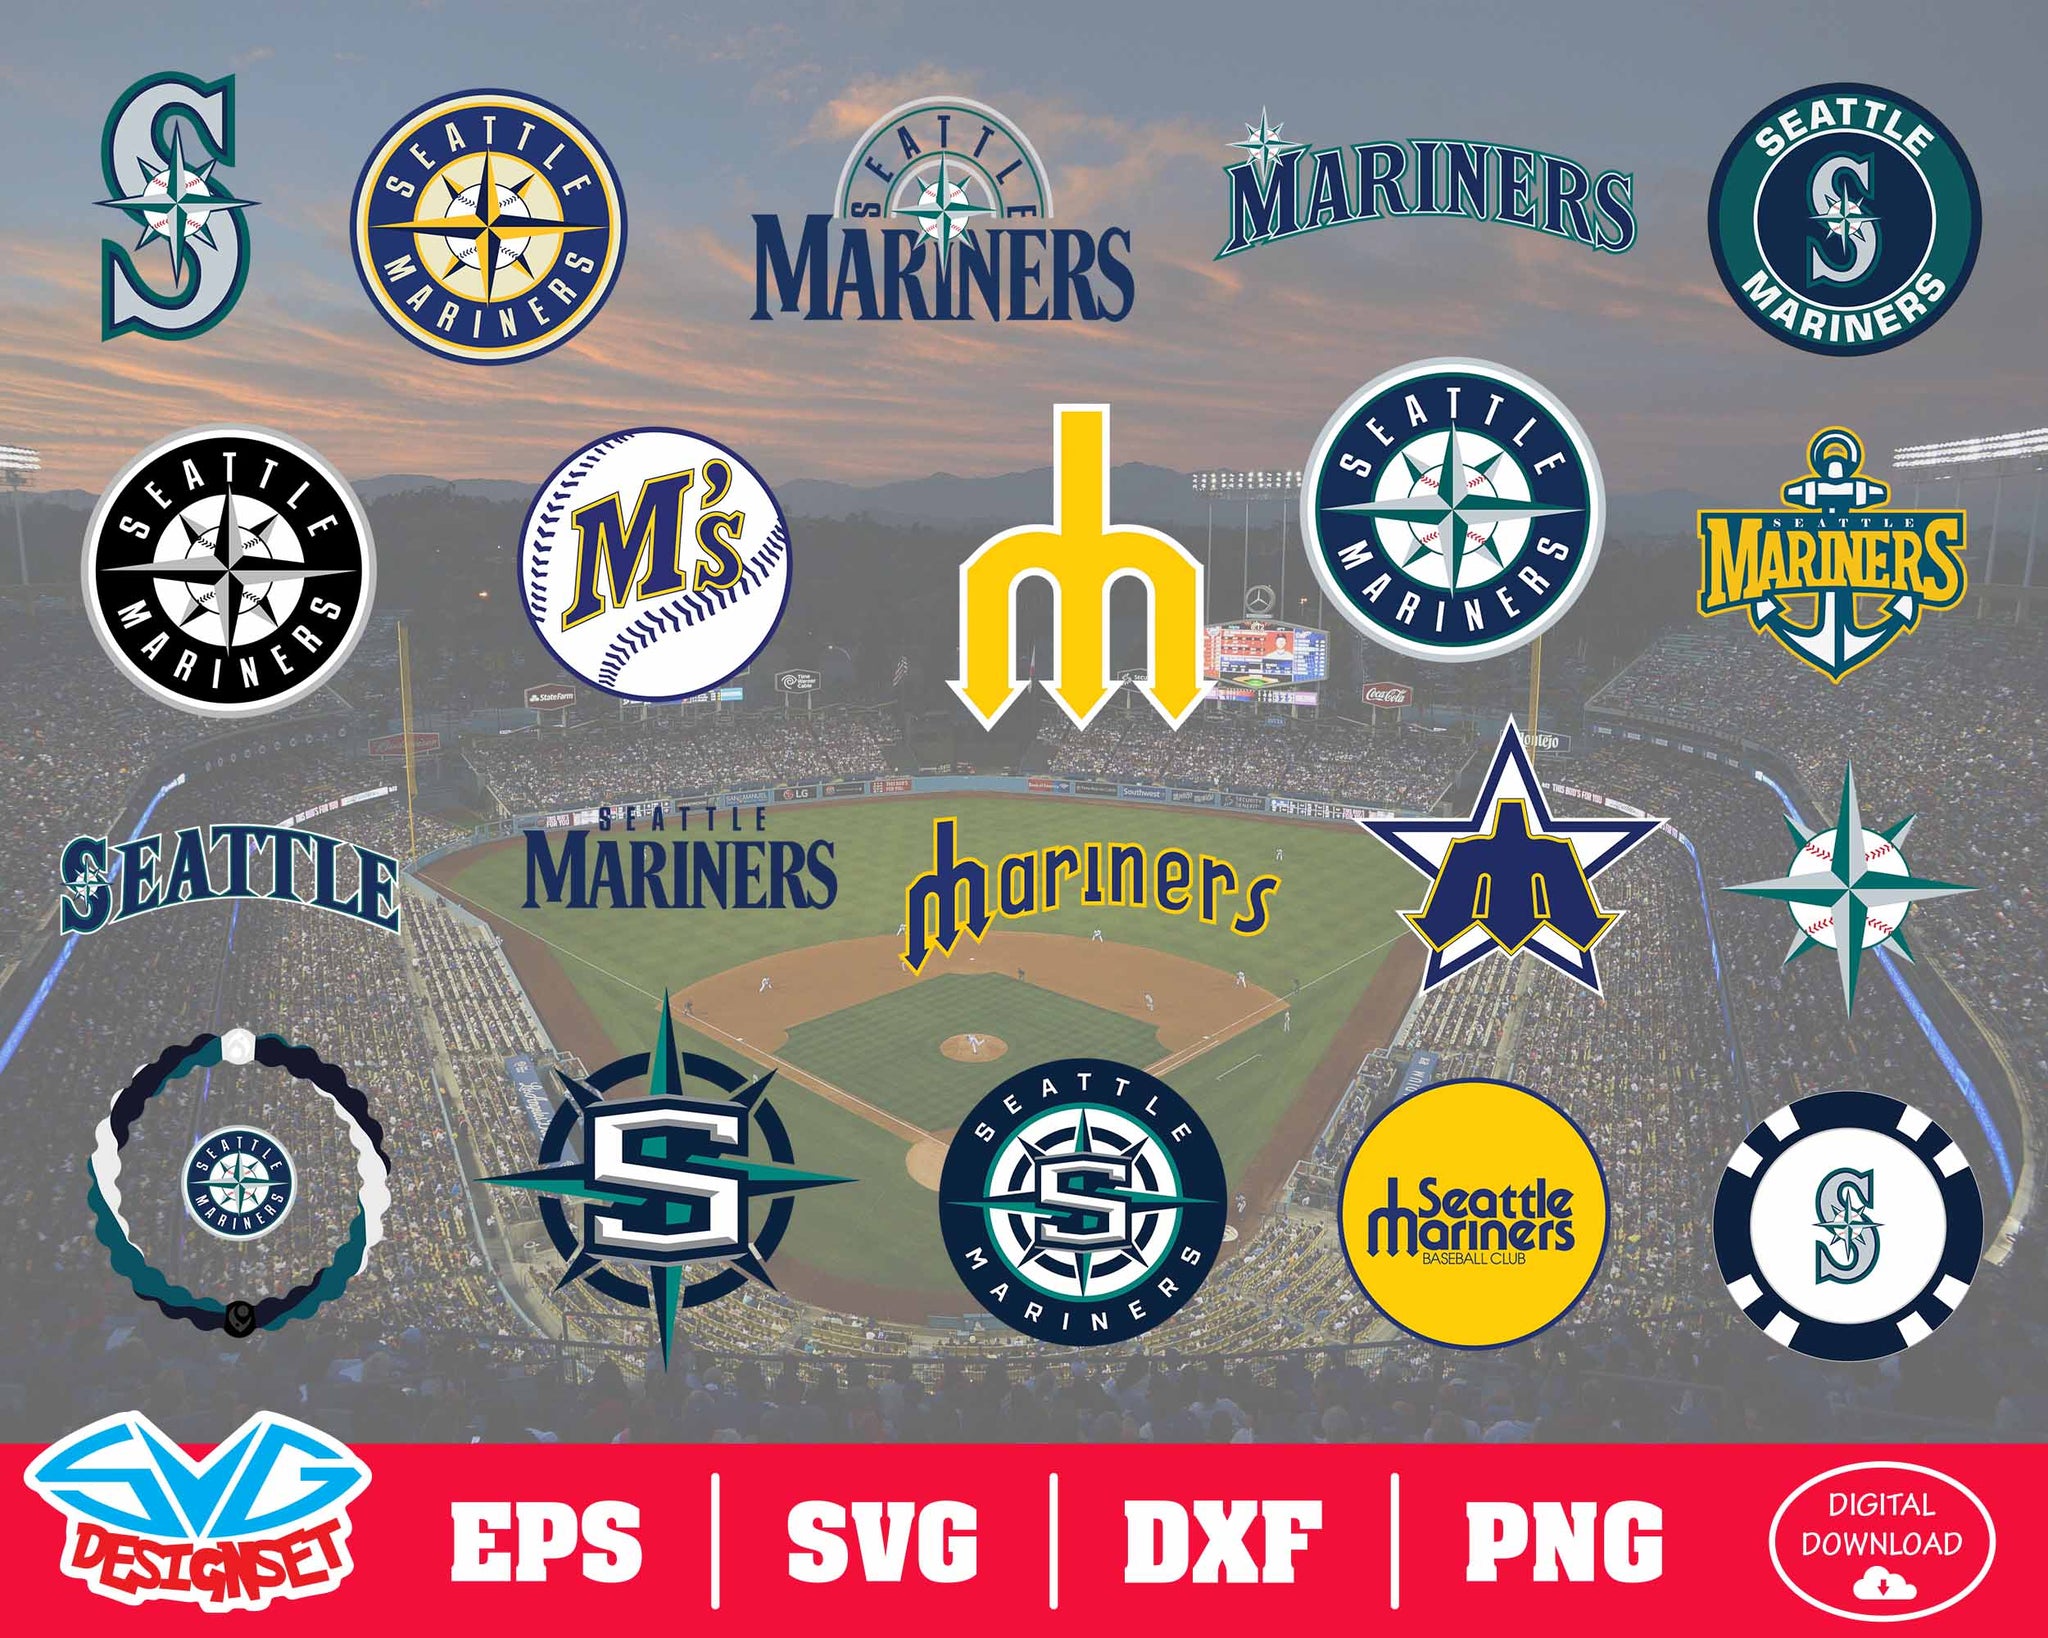 Seattle Mariners Team Svg, Dxf, Eps, Png, Clipart, Silhouette and Cutfiles - SVGDesignSets